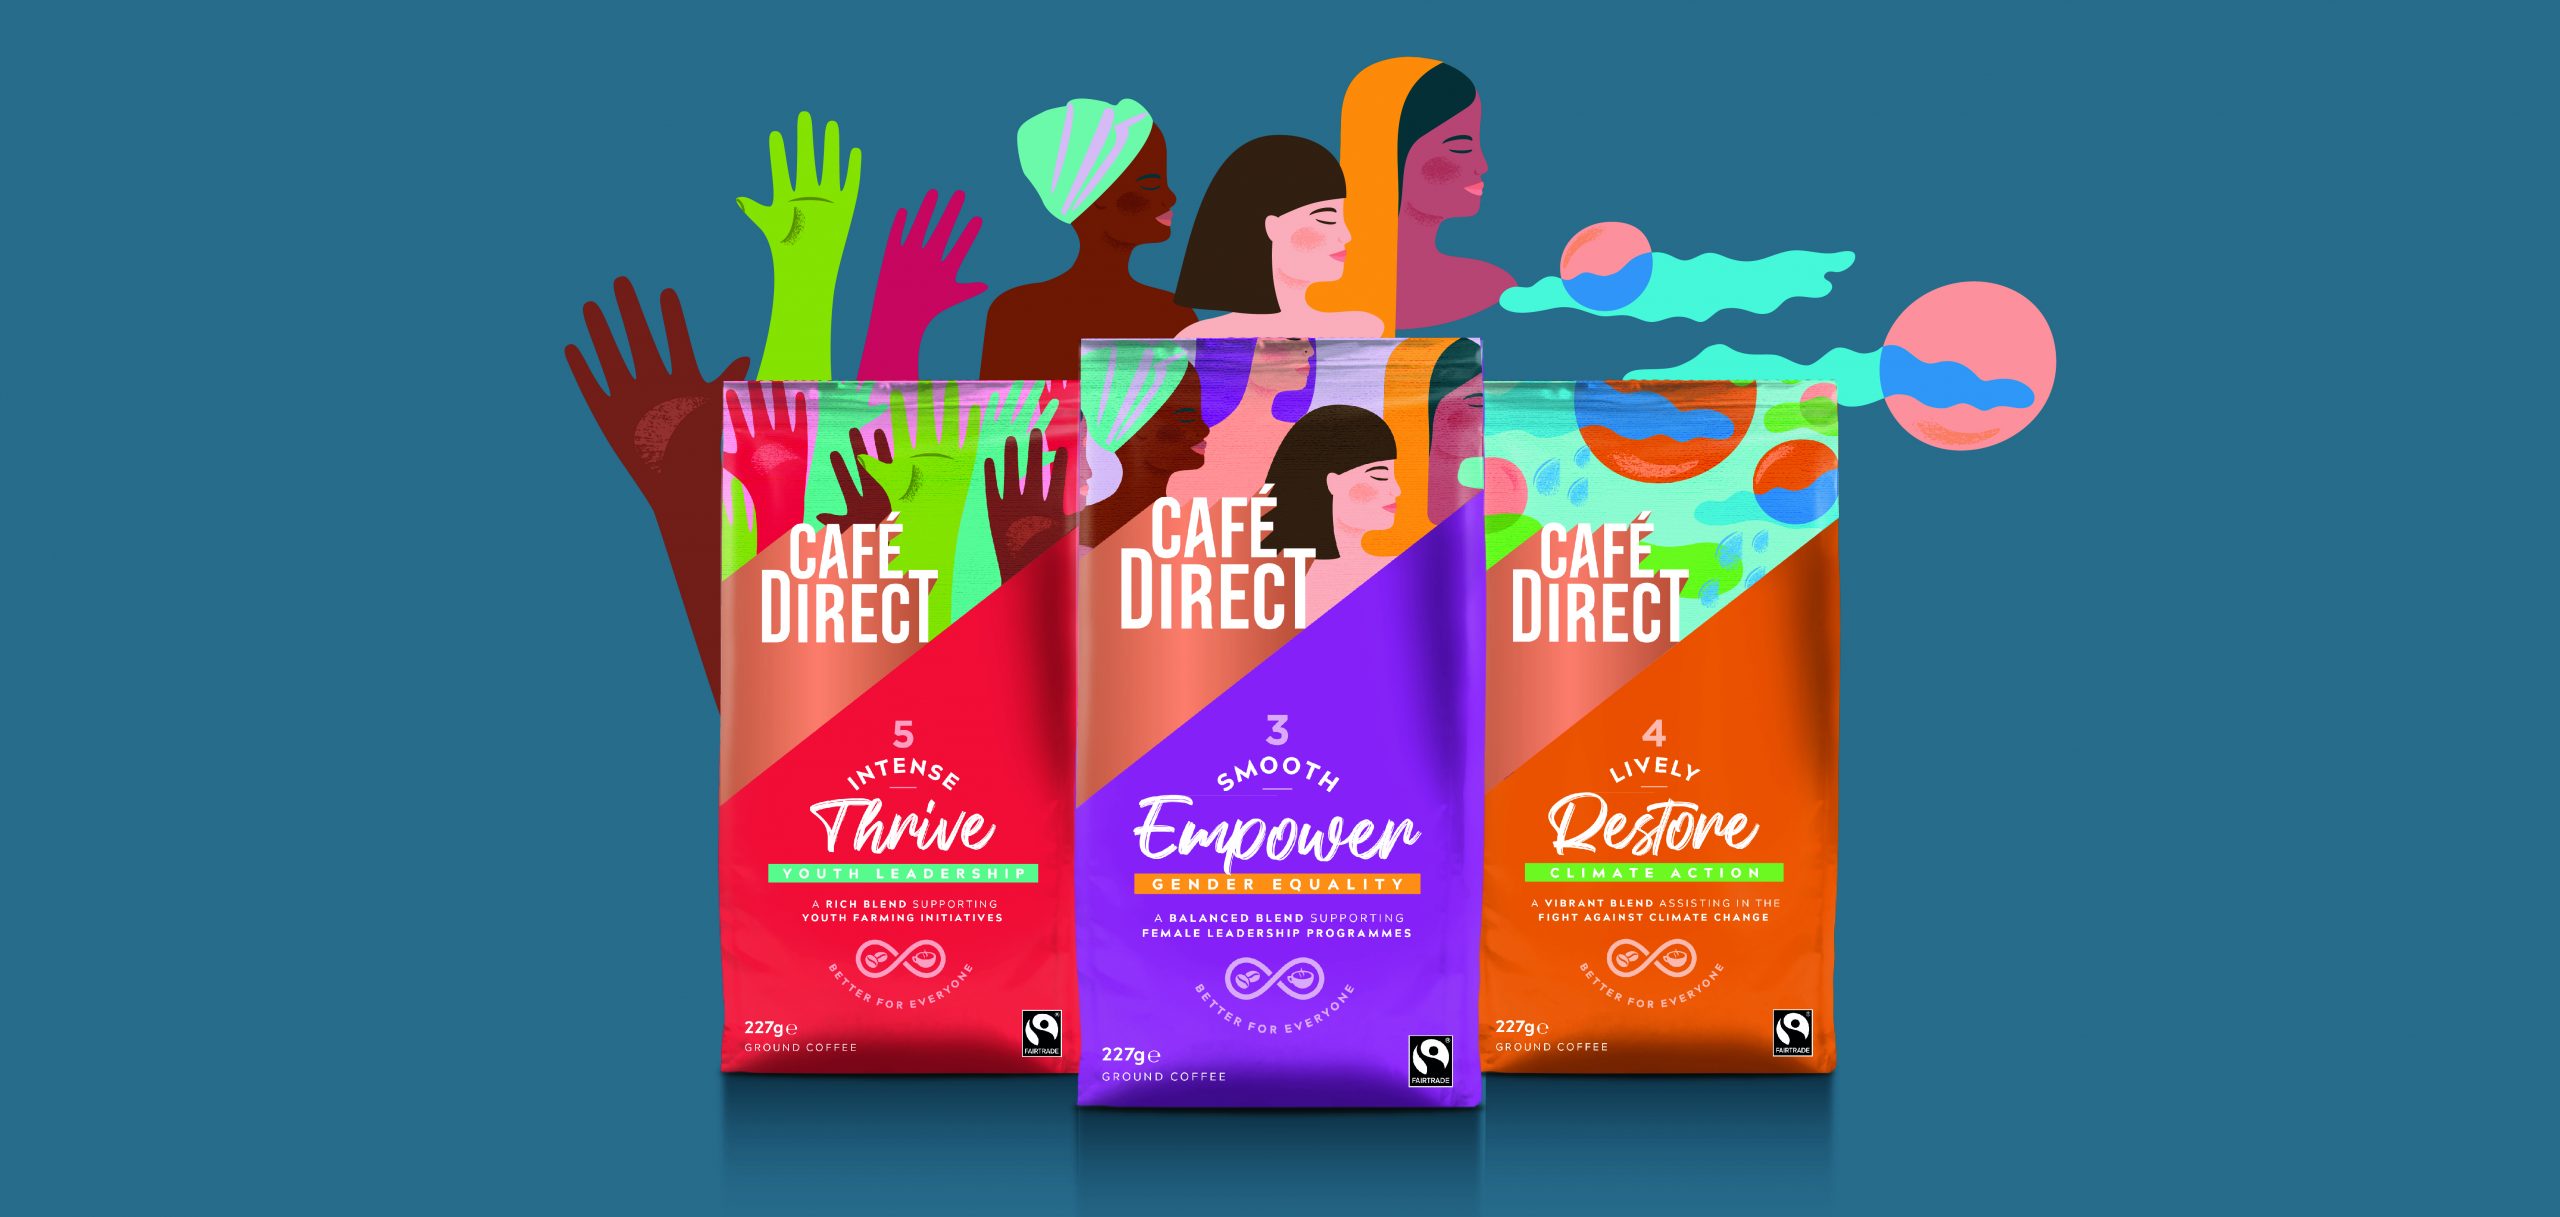 Cafédirect unveils new look and products